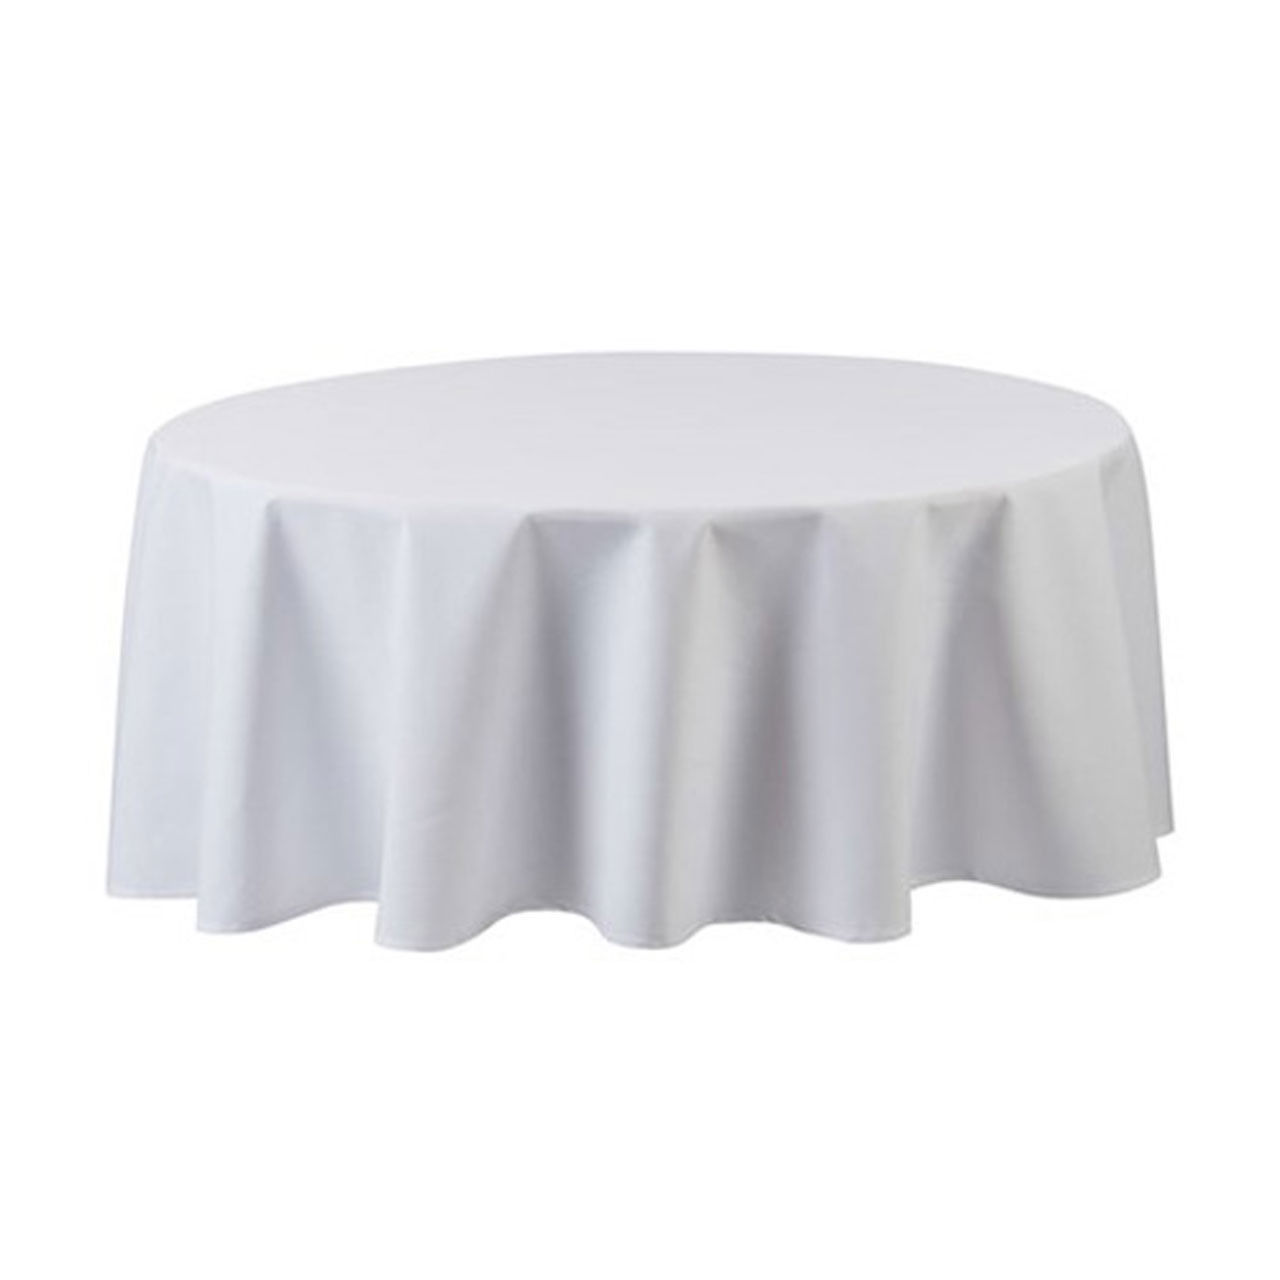 What is the color of the 120 round tablecloth in Seamless White 120" Rounds Tablecloth?